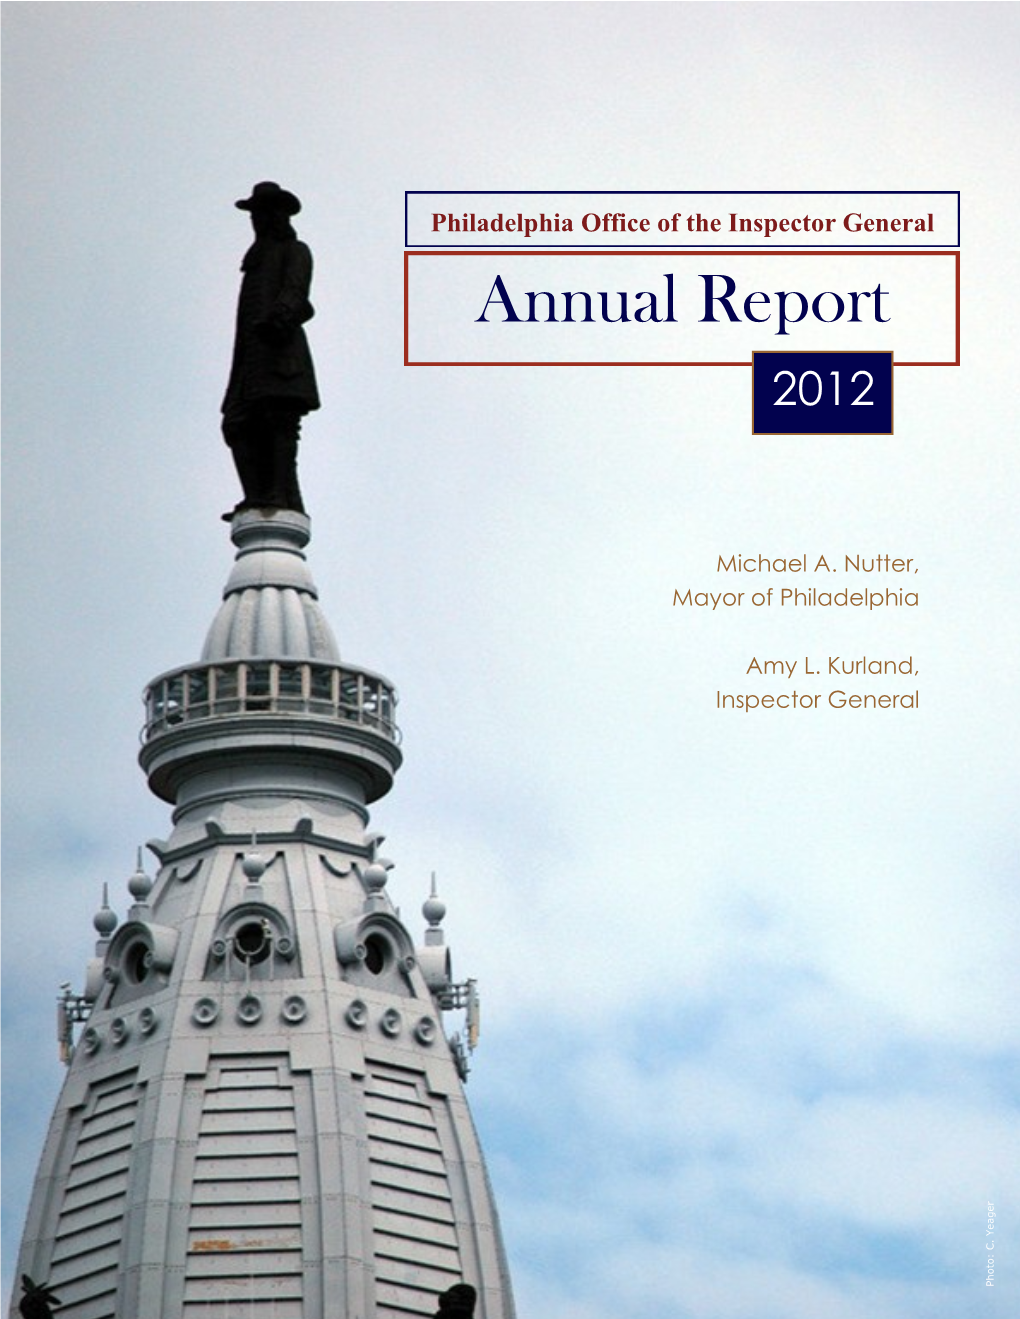 Philadelphia Office of the Inspector General Annual Report 2012